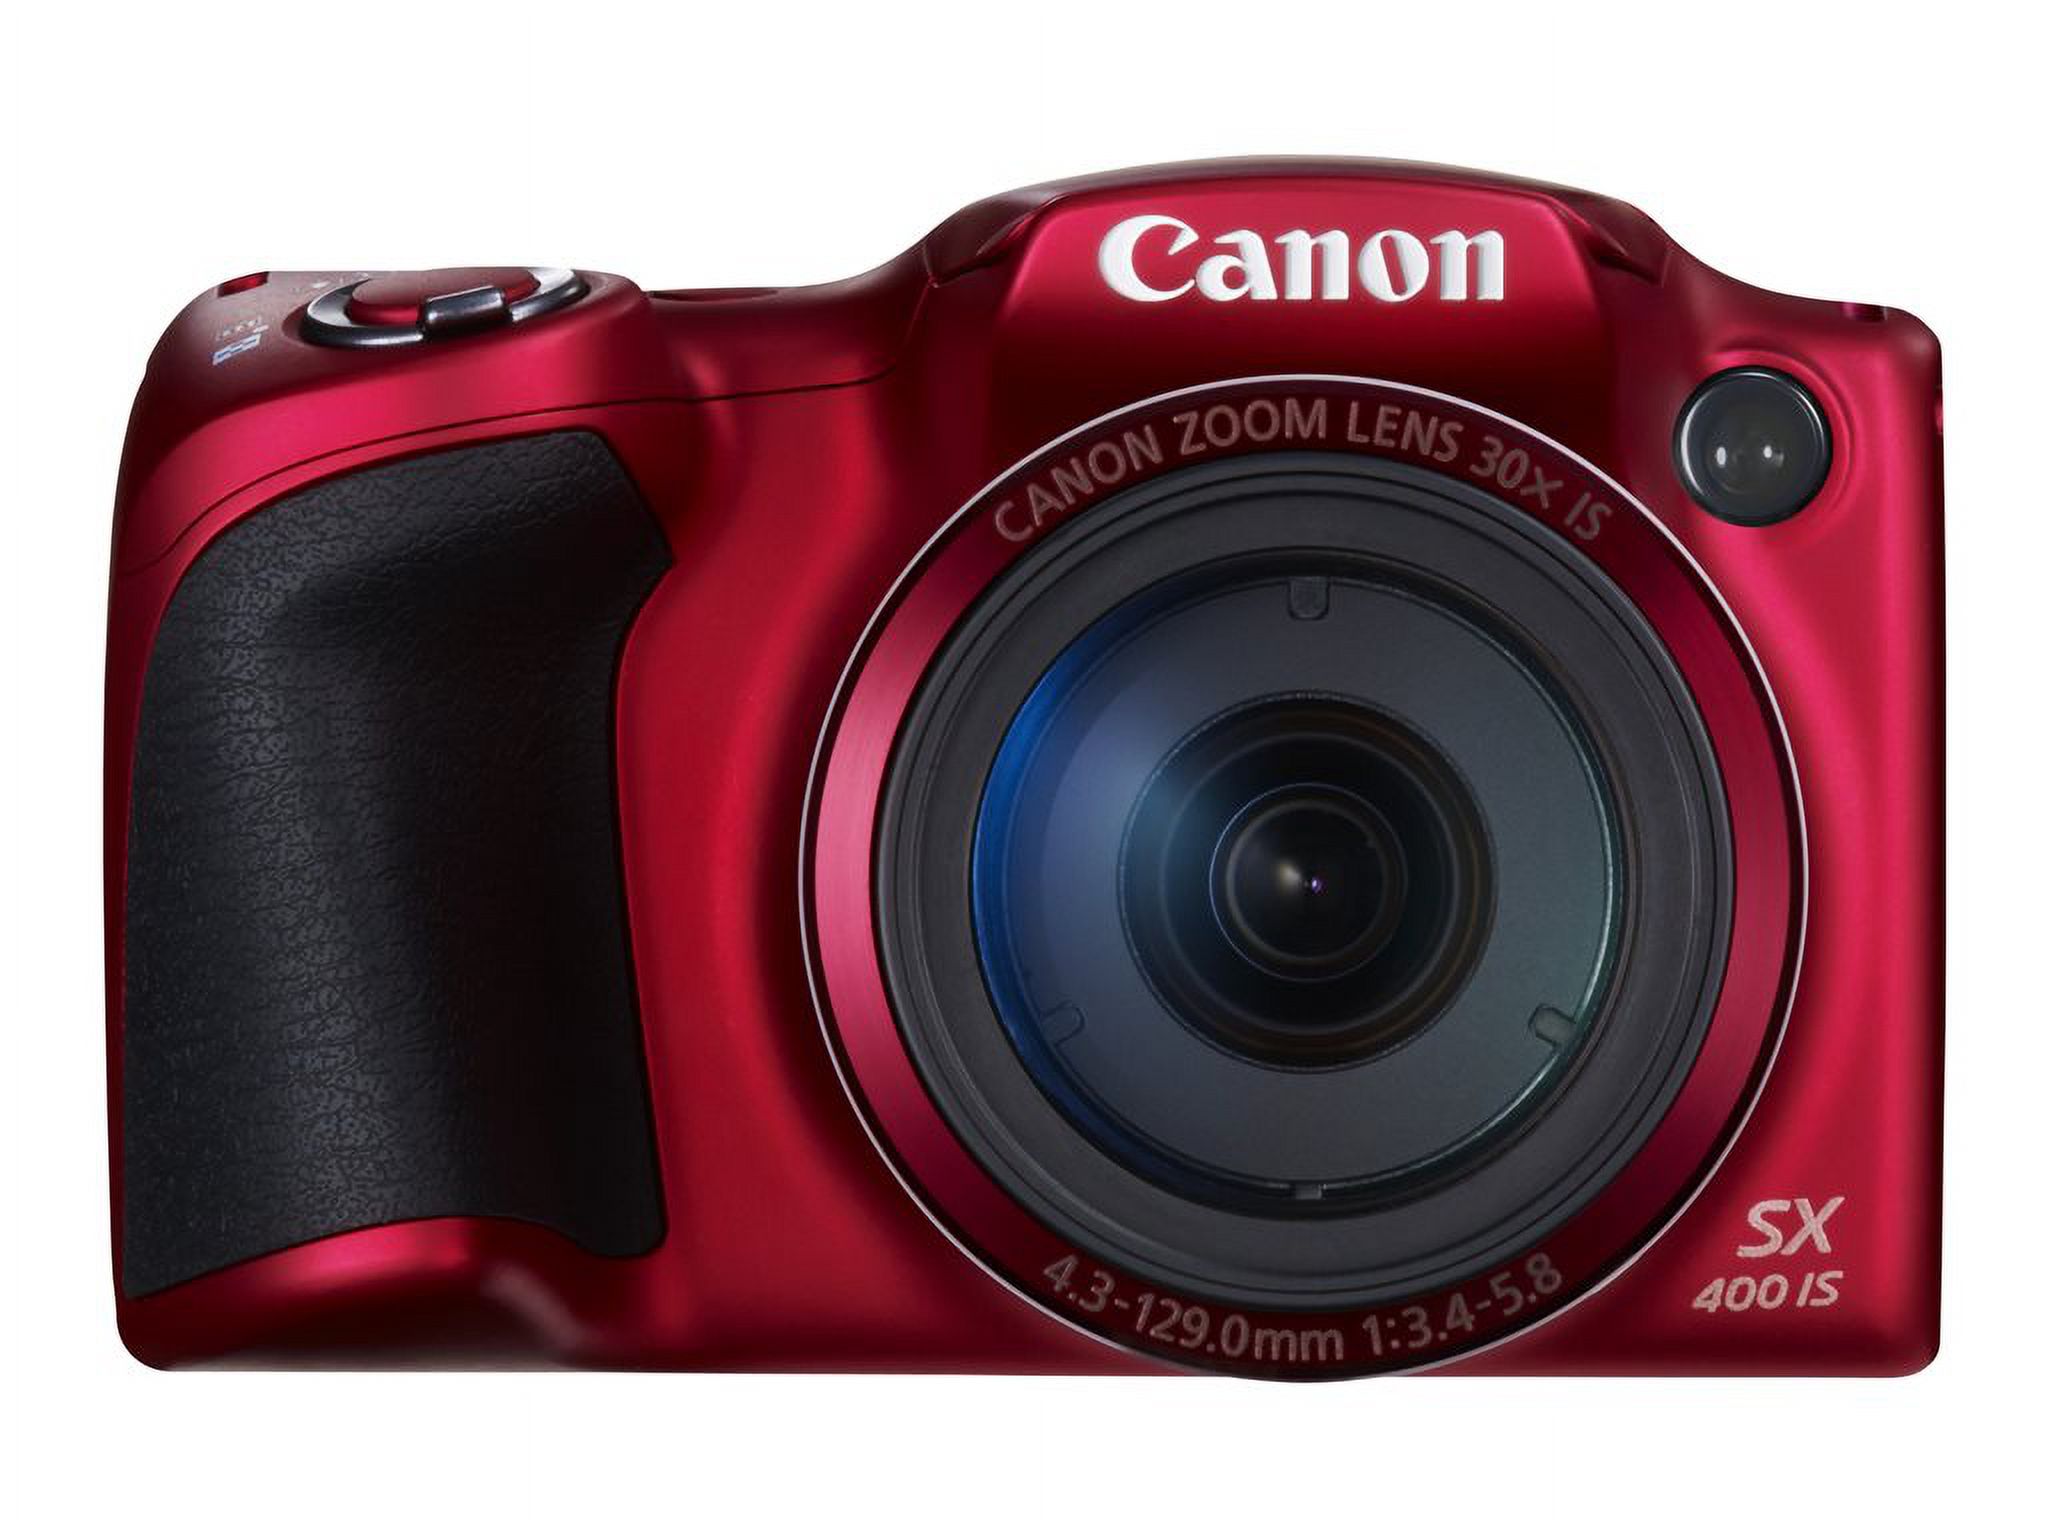 Canon PowerShot SX400 IS - Digital camera - High Definition - compact - 16.0 MP - 30 x optical zoom - red - image 16 of 72